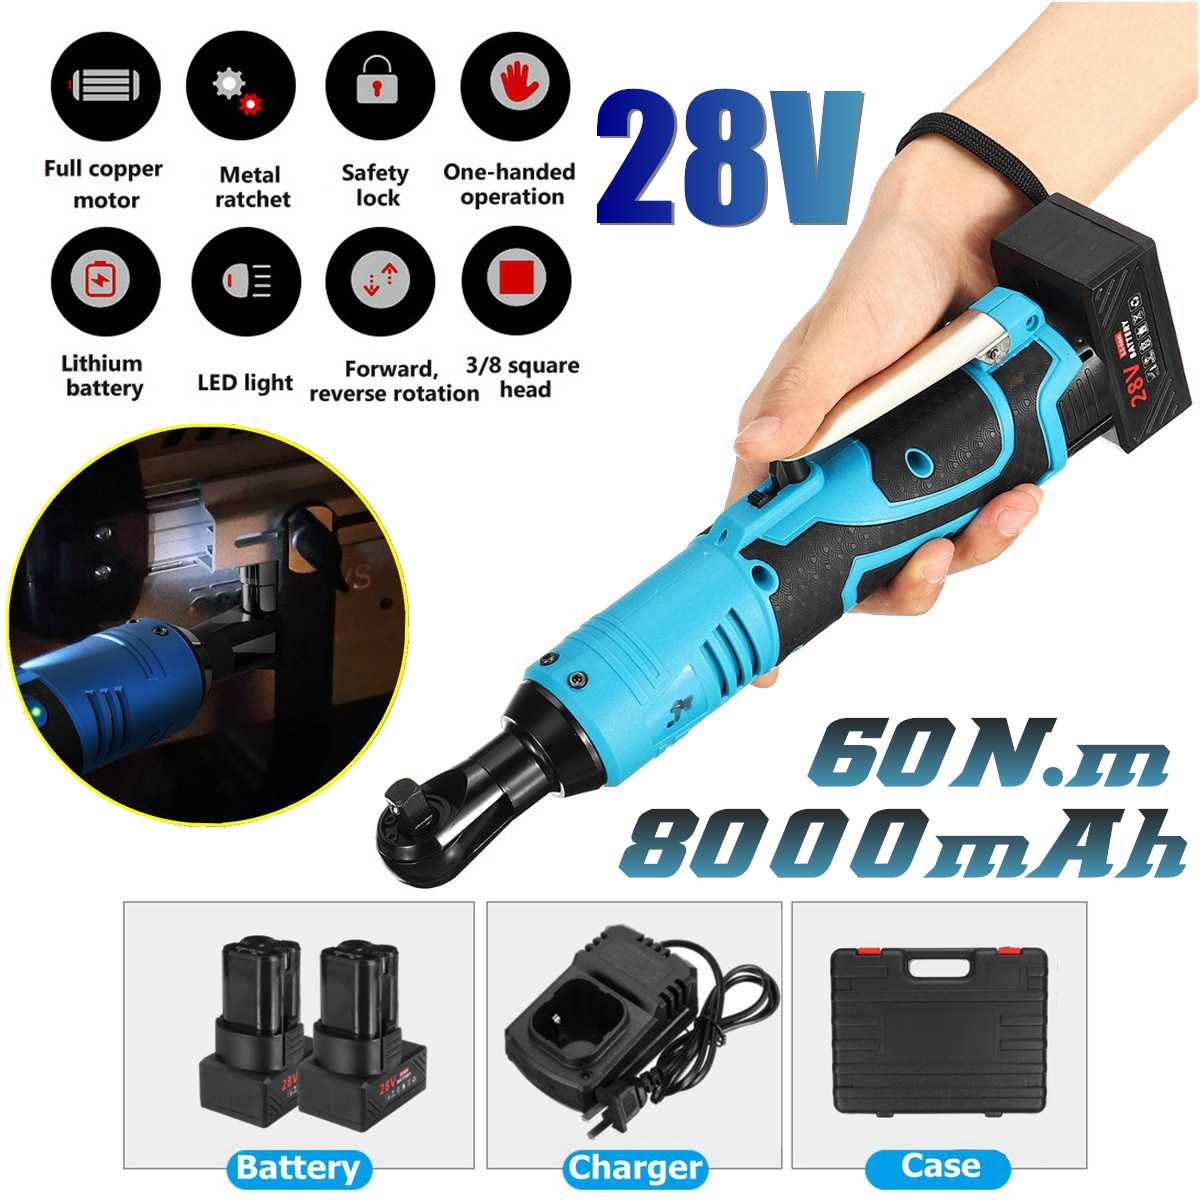 28V-60Nm-LED-Cordless-Electric-Ratchet-Wrench-38-Inch-Chuck-Right-Angle-Wrench-Tool-W-2Pcs-Li-ion-Ba-1496387-1